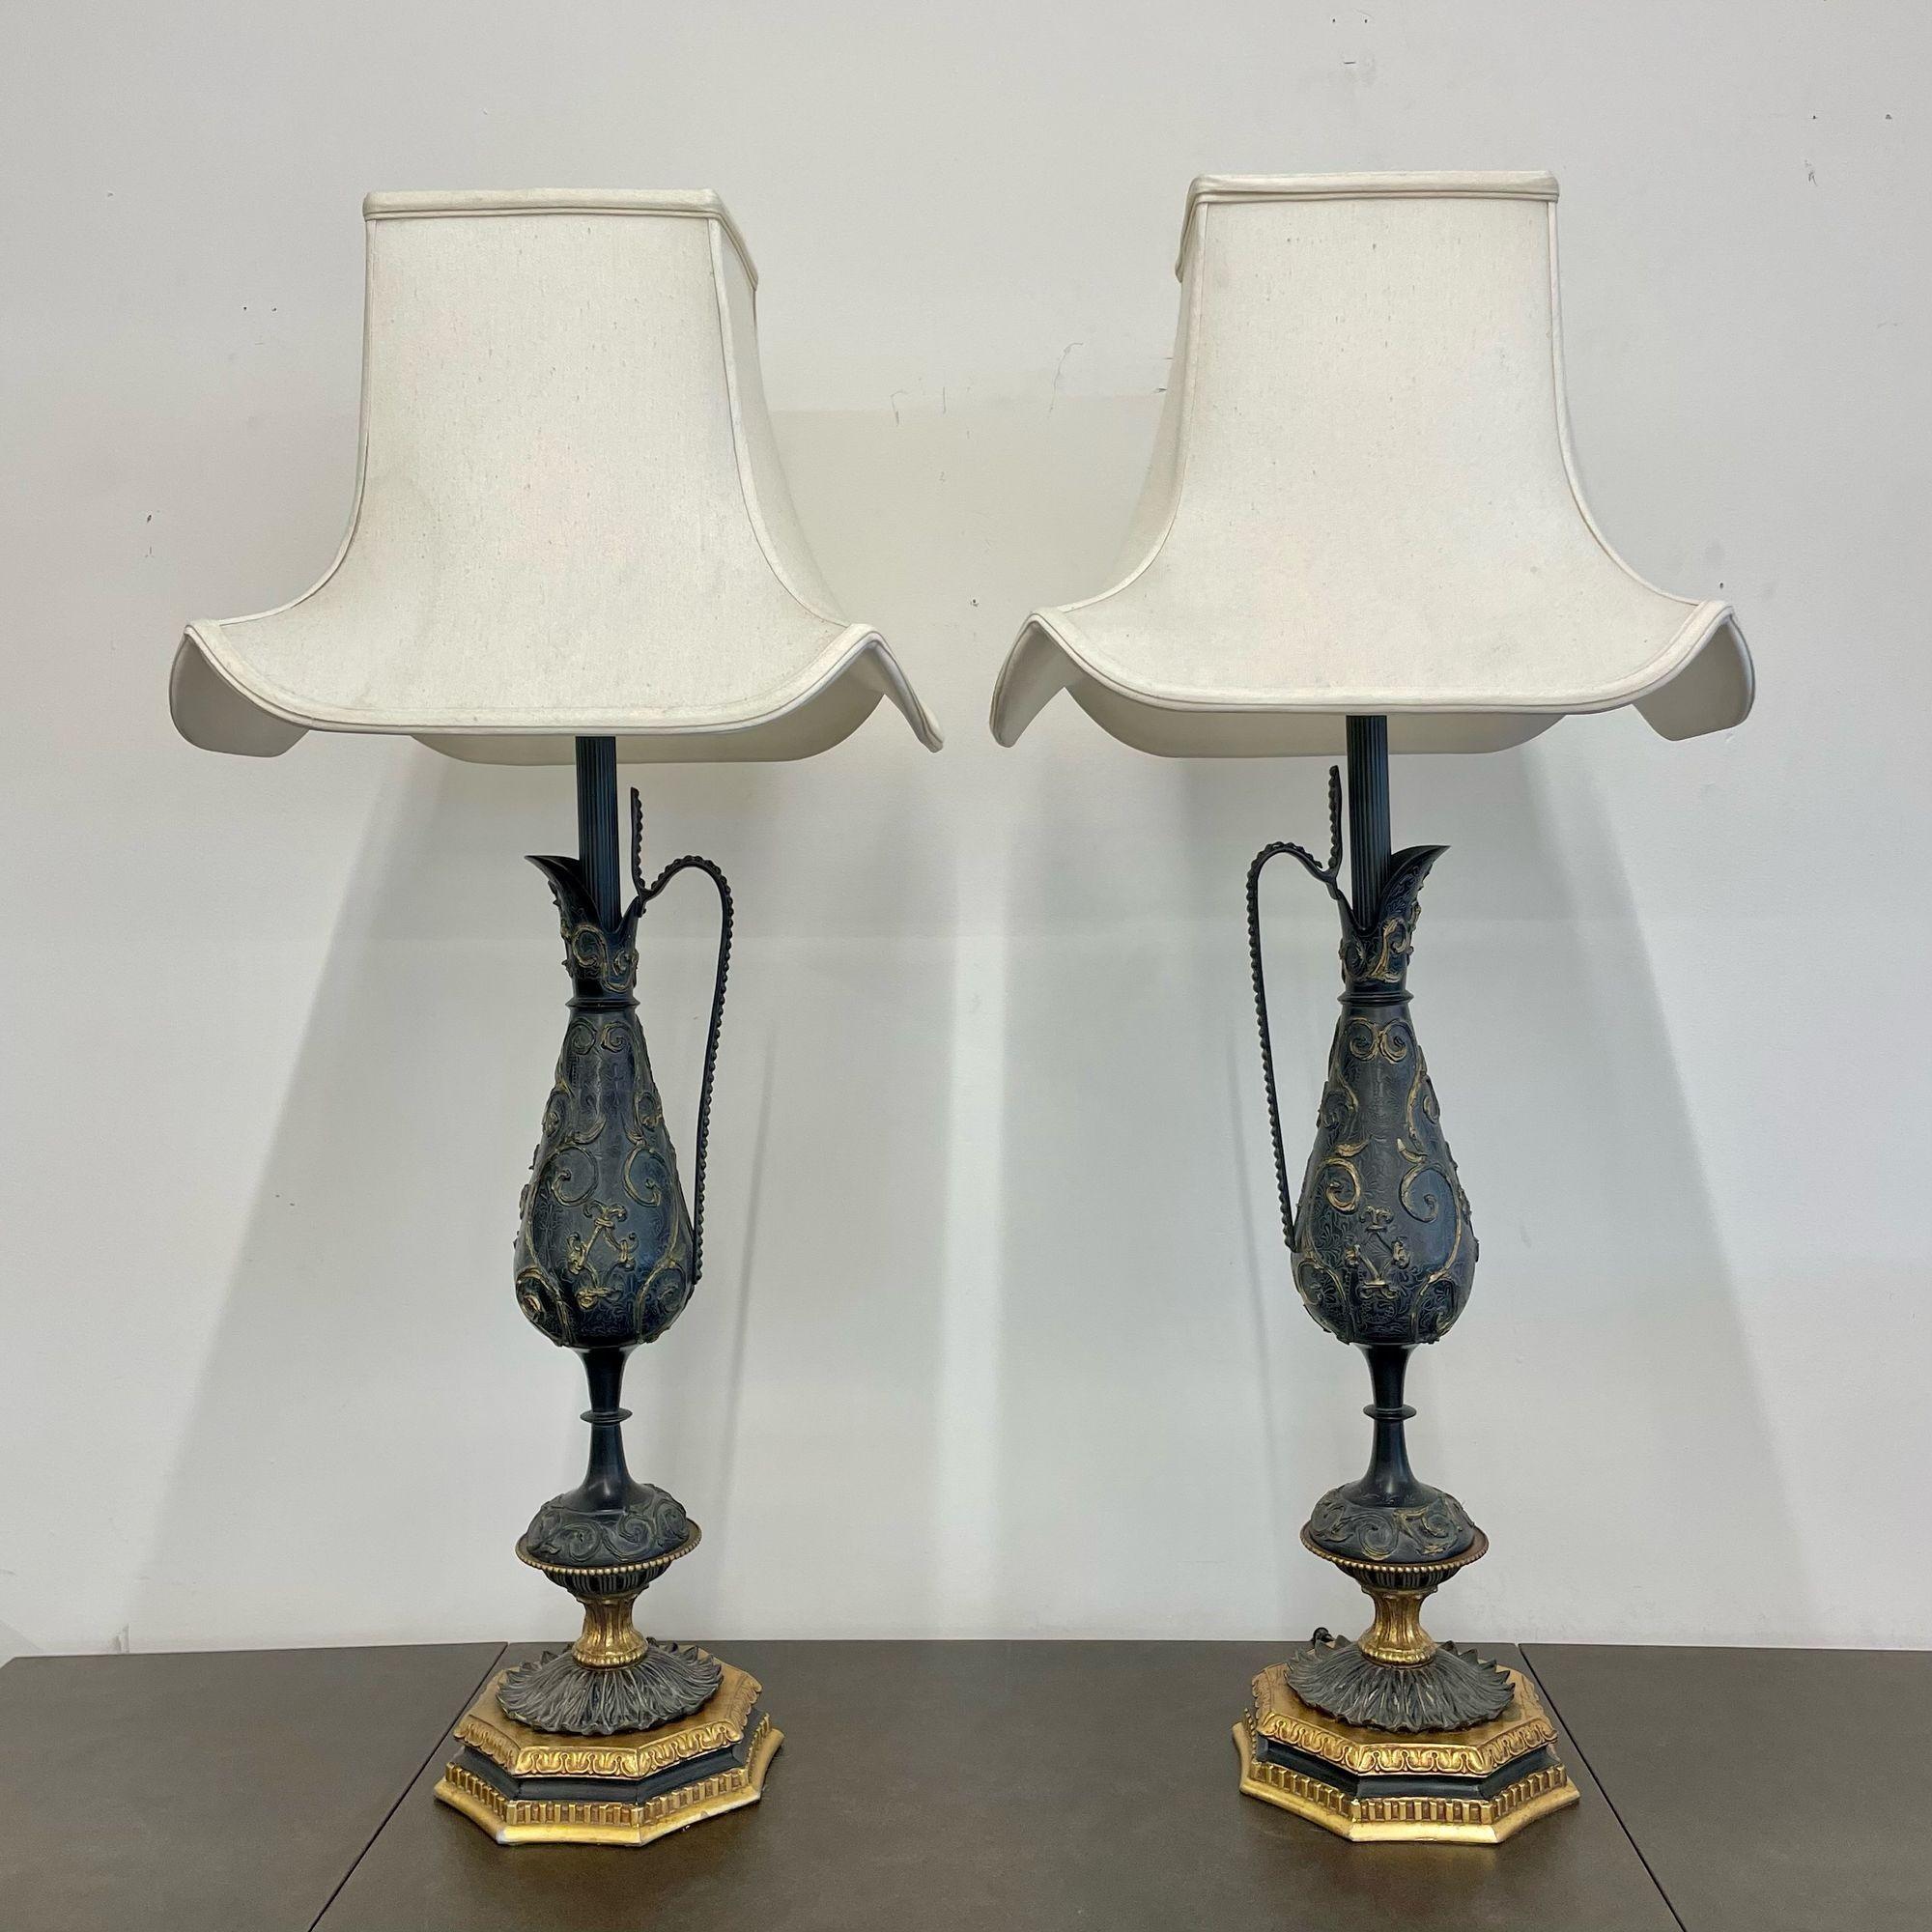 A Pair of Neoclassical Bronze and Metal Urn Form Table Lamps
 
A finely cast pair of water urns each having a large handle. The pair sitting on bases having a scroll and floral design with a mixed metal depicting gold overtones. Lamps are in need of